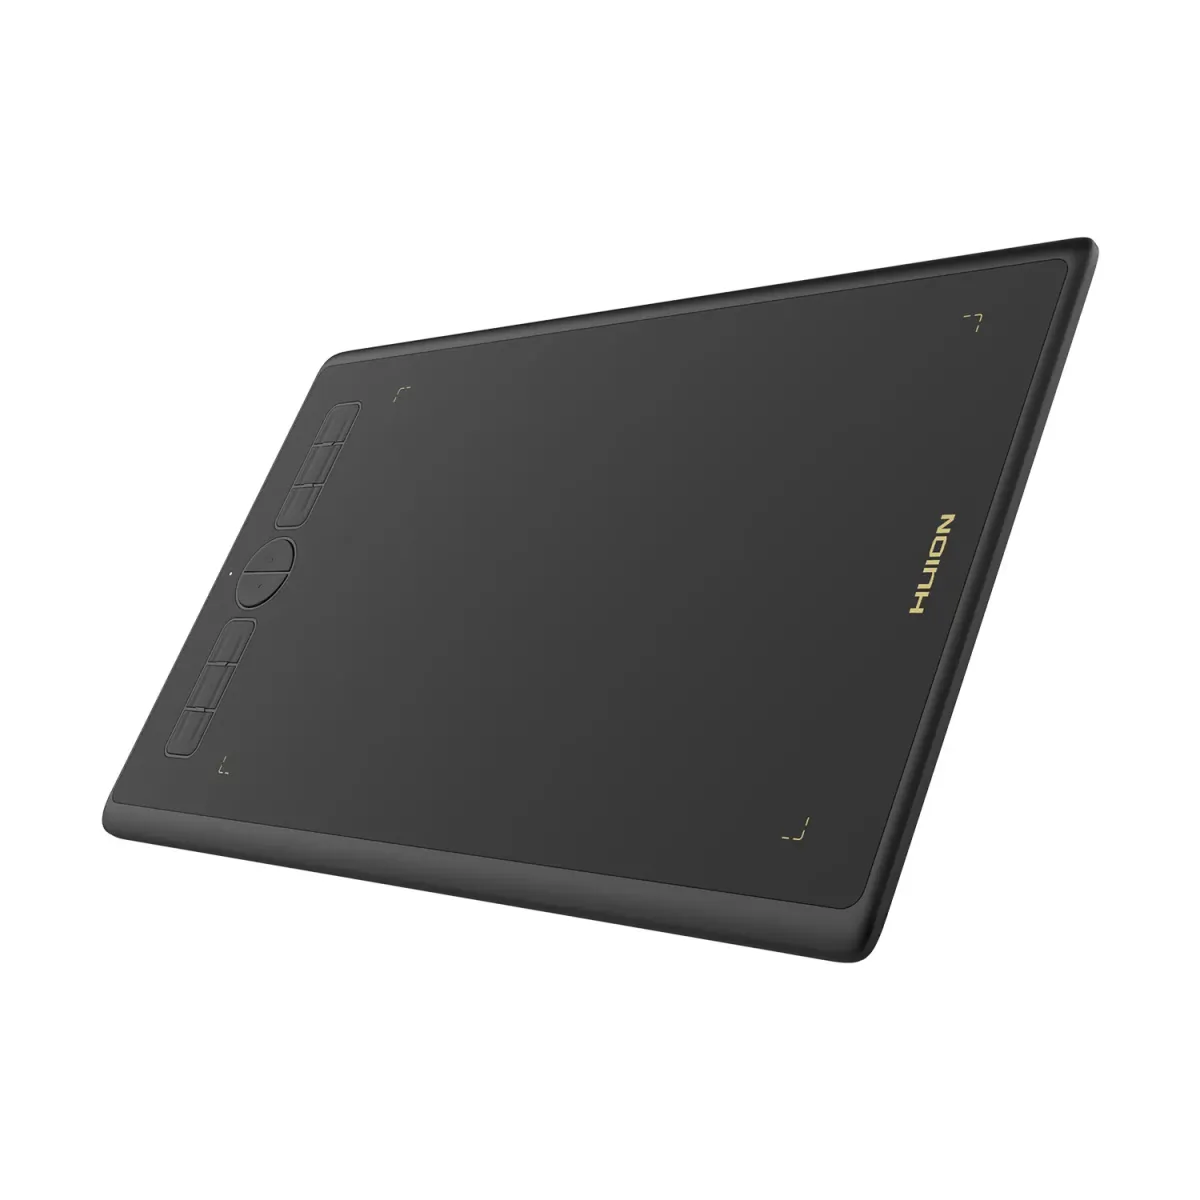 Unboxing Huion A4 Light Pad and Comparing it to the Huion L4S Light Pad 